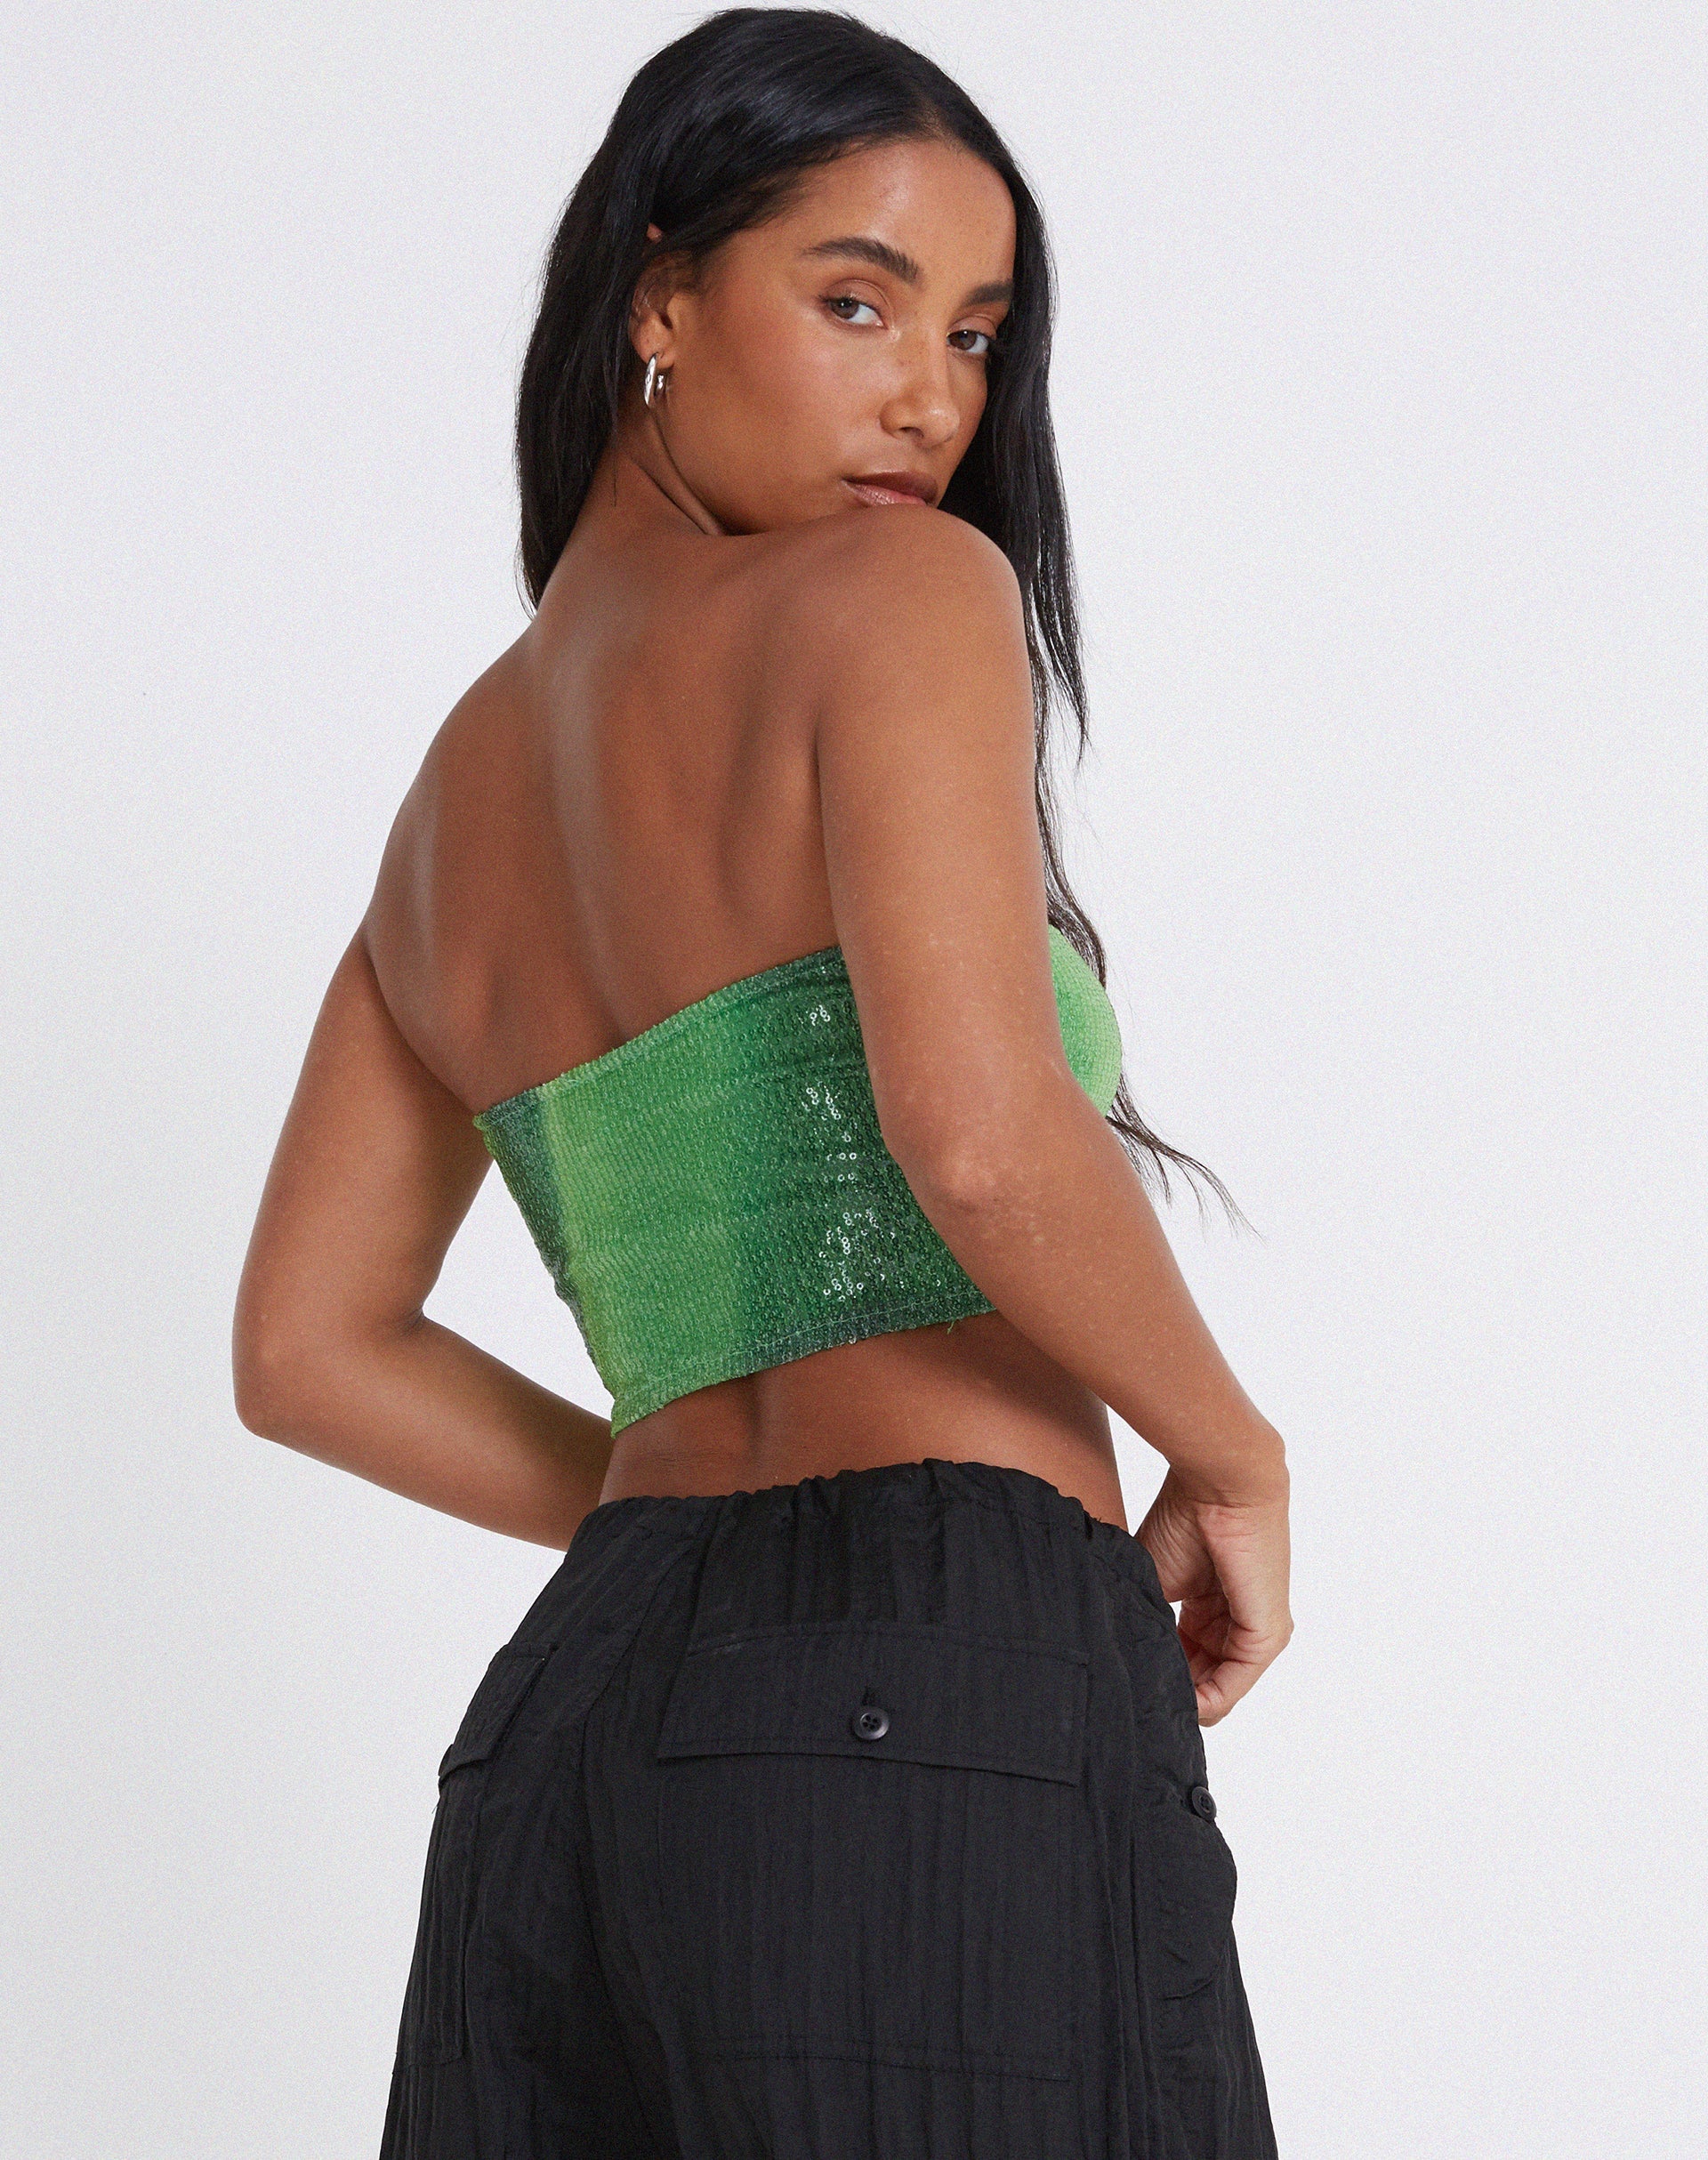 Bandira Bandeau Top in Sequin Solarized Green